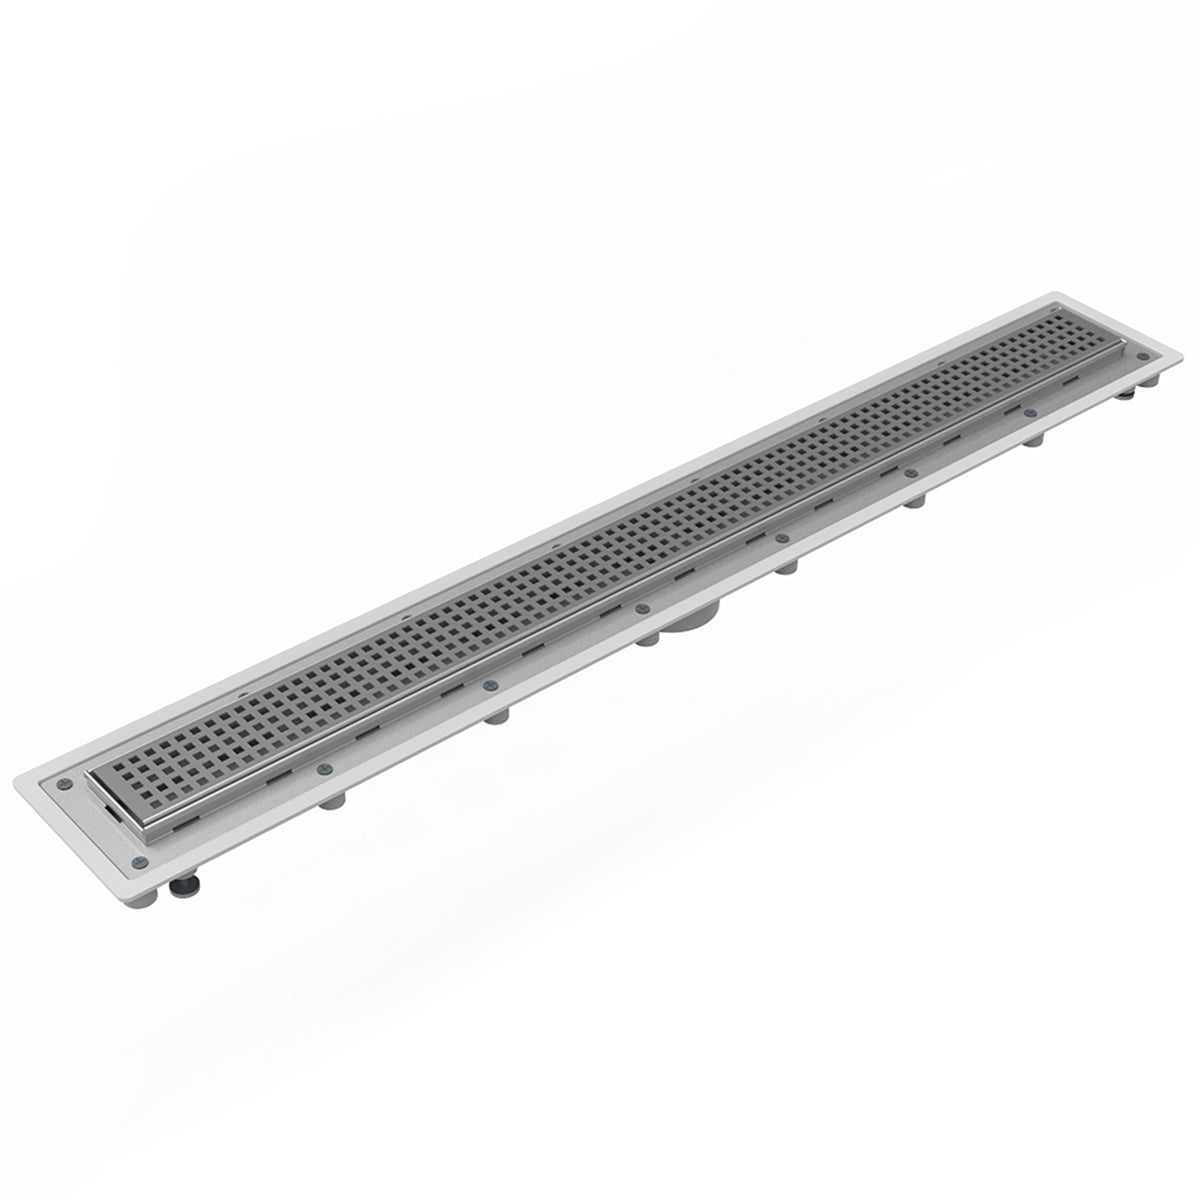 Infinity Drain 30" Universal Infinity Linear Drain Kit with PVC Channel and Squares Pattern Grate